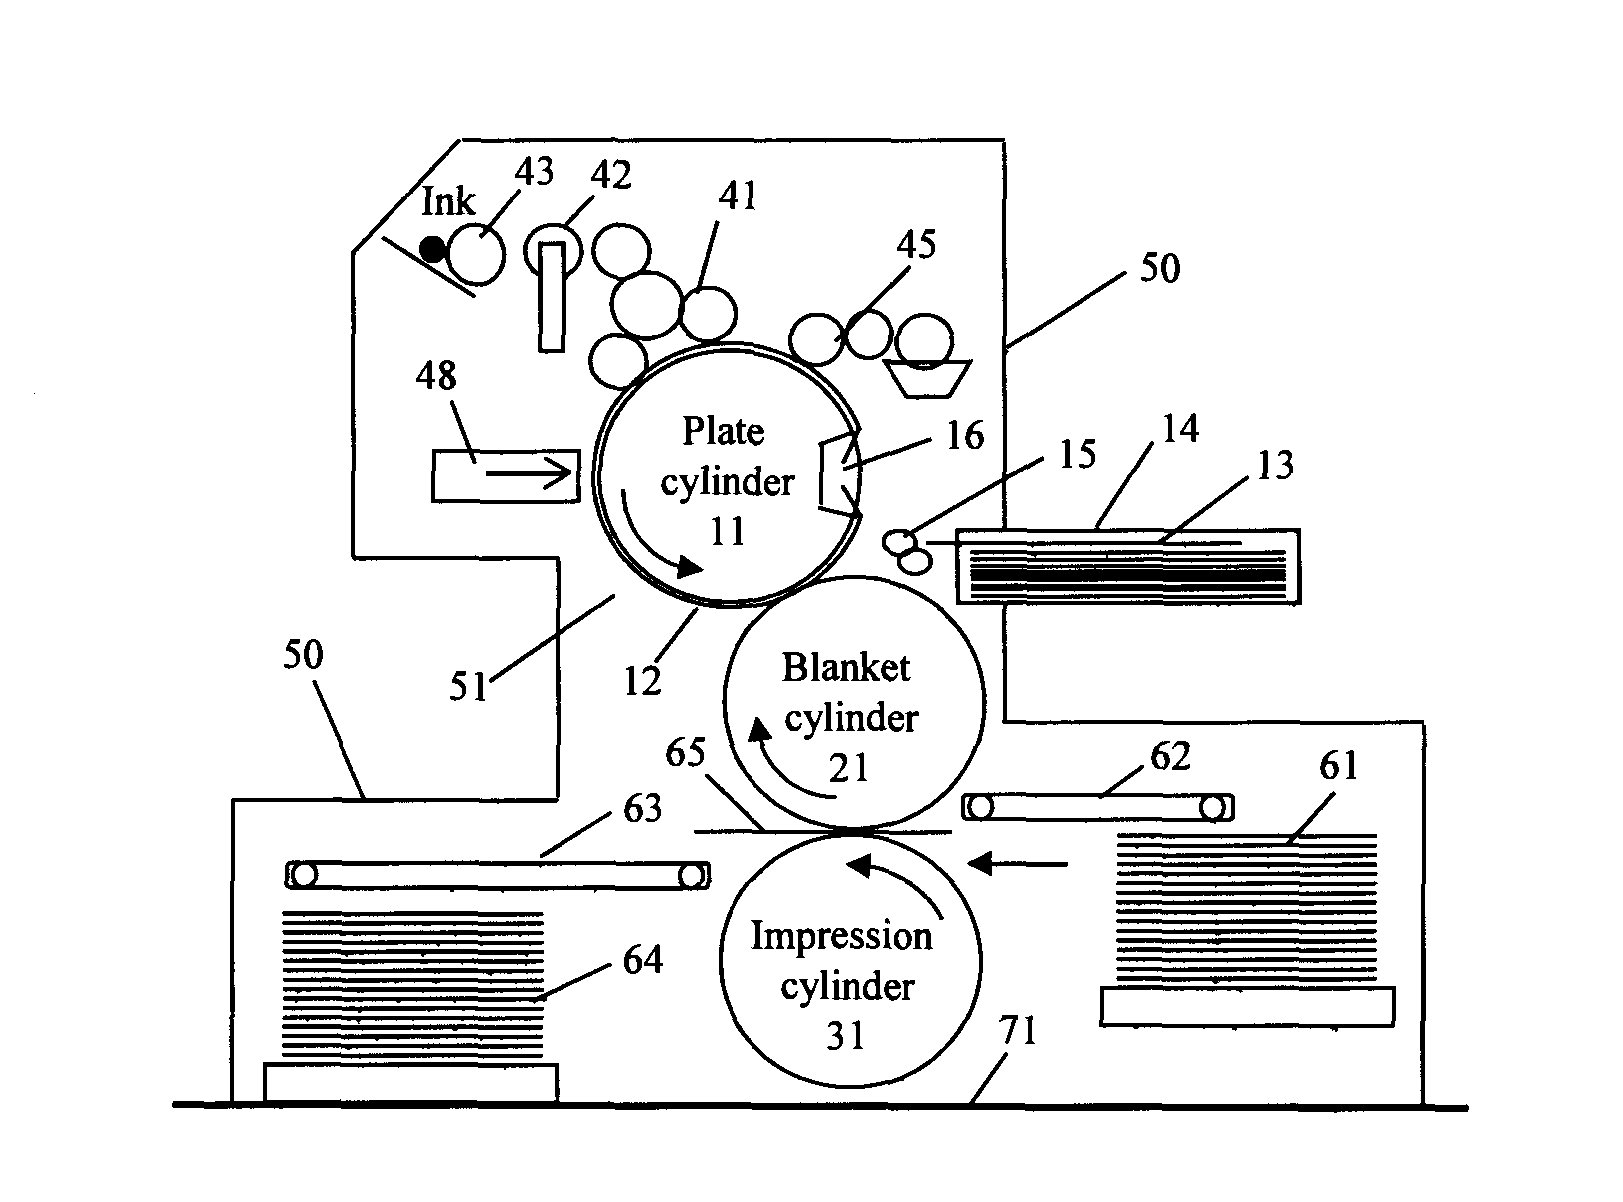 Lithographic printing press and method for on-press imaging laser sensitive lithographic plate